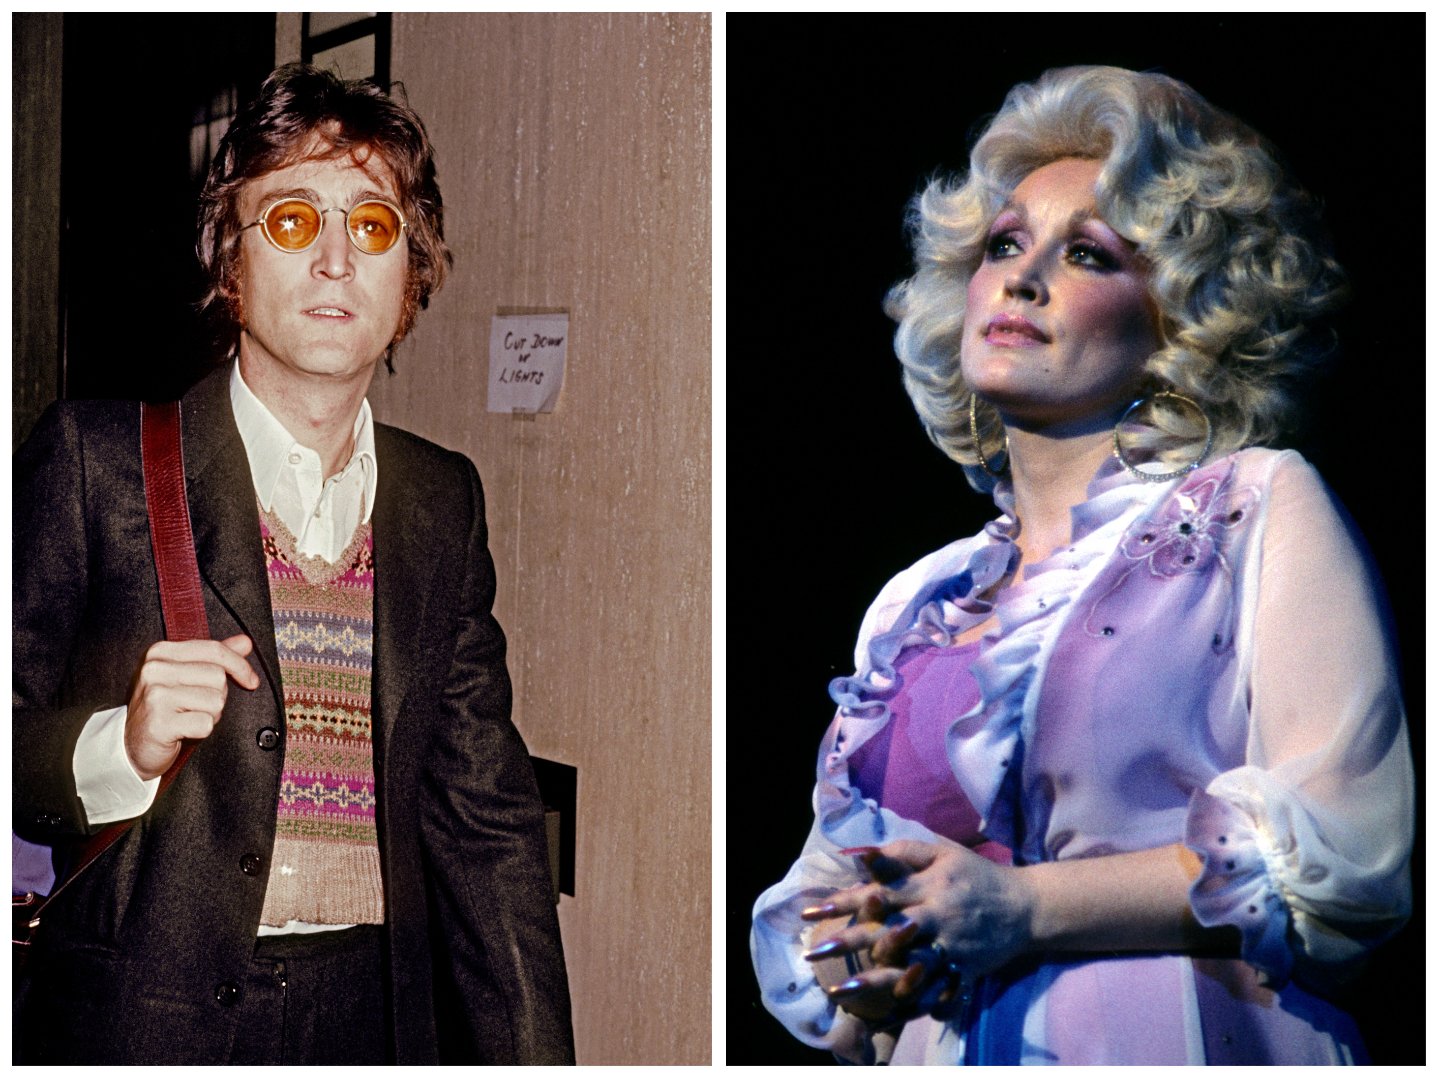 John Lennon holds a bag and wears tinted glasses. Dolly Parton wears a purple dress and clasps her hands. 